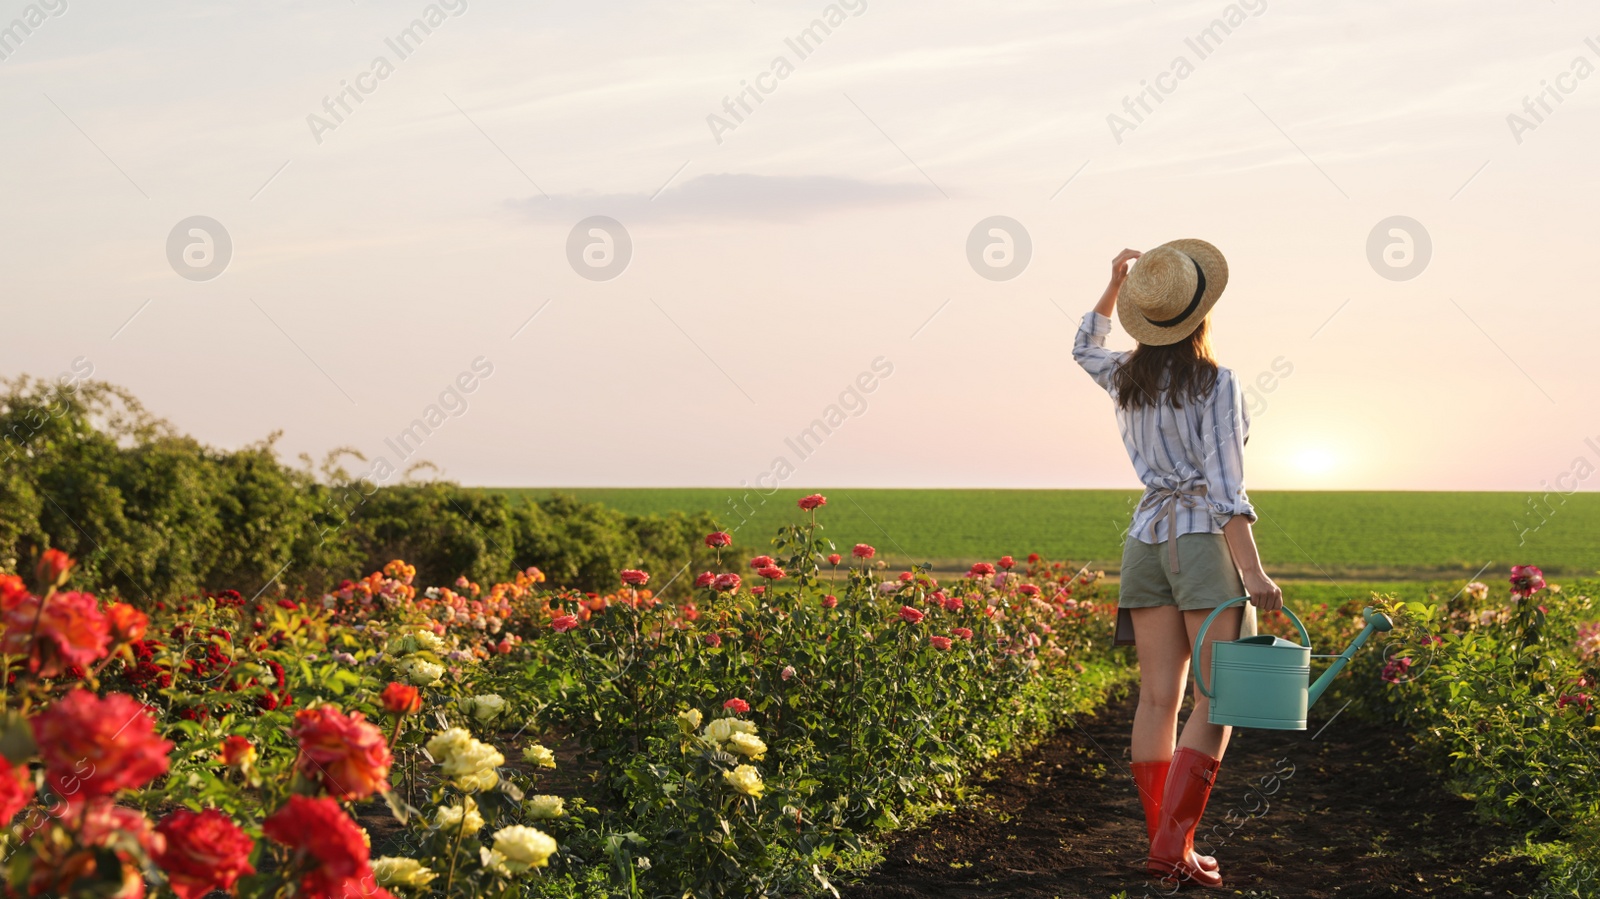 Photo of Woman with watering can walking near rose bushes outdoors. Gardening tool